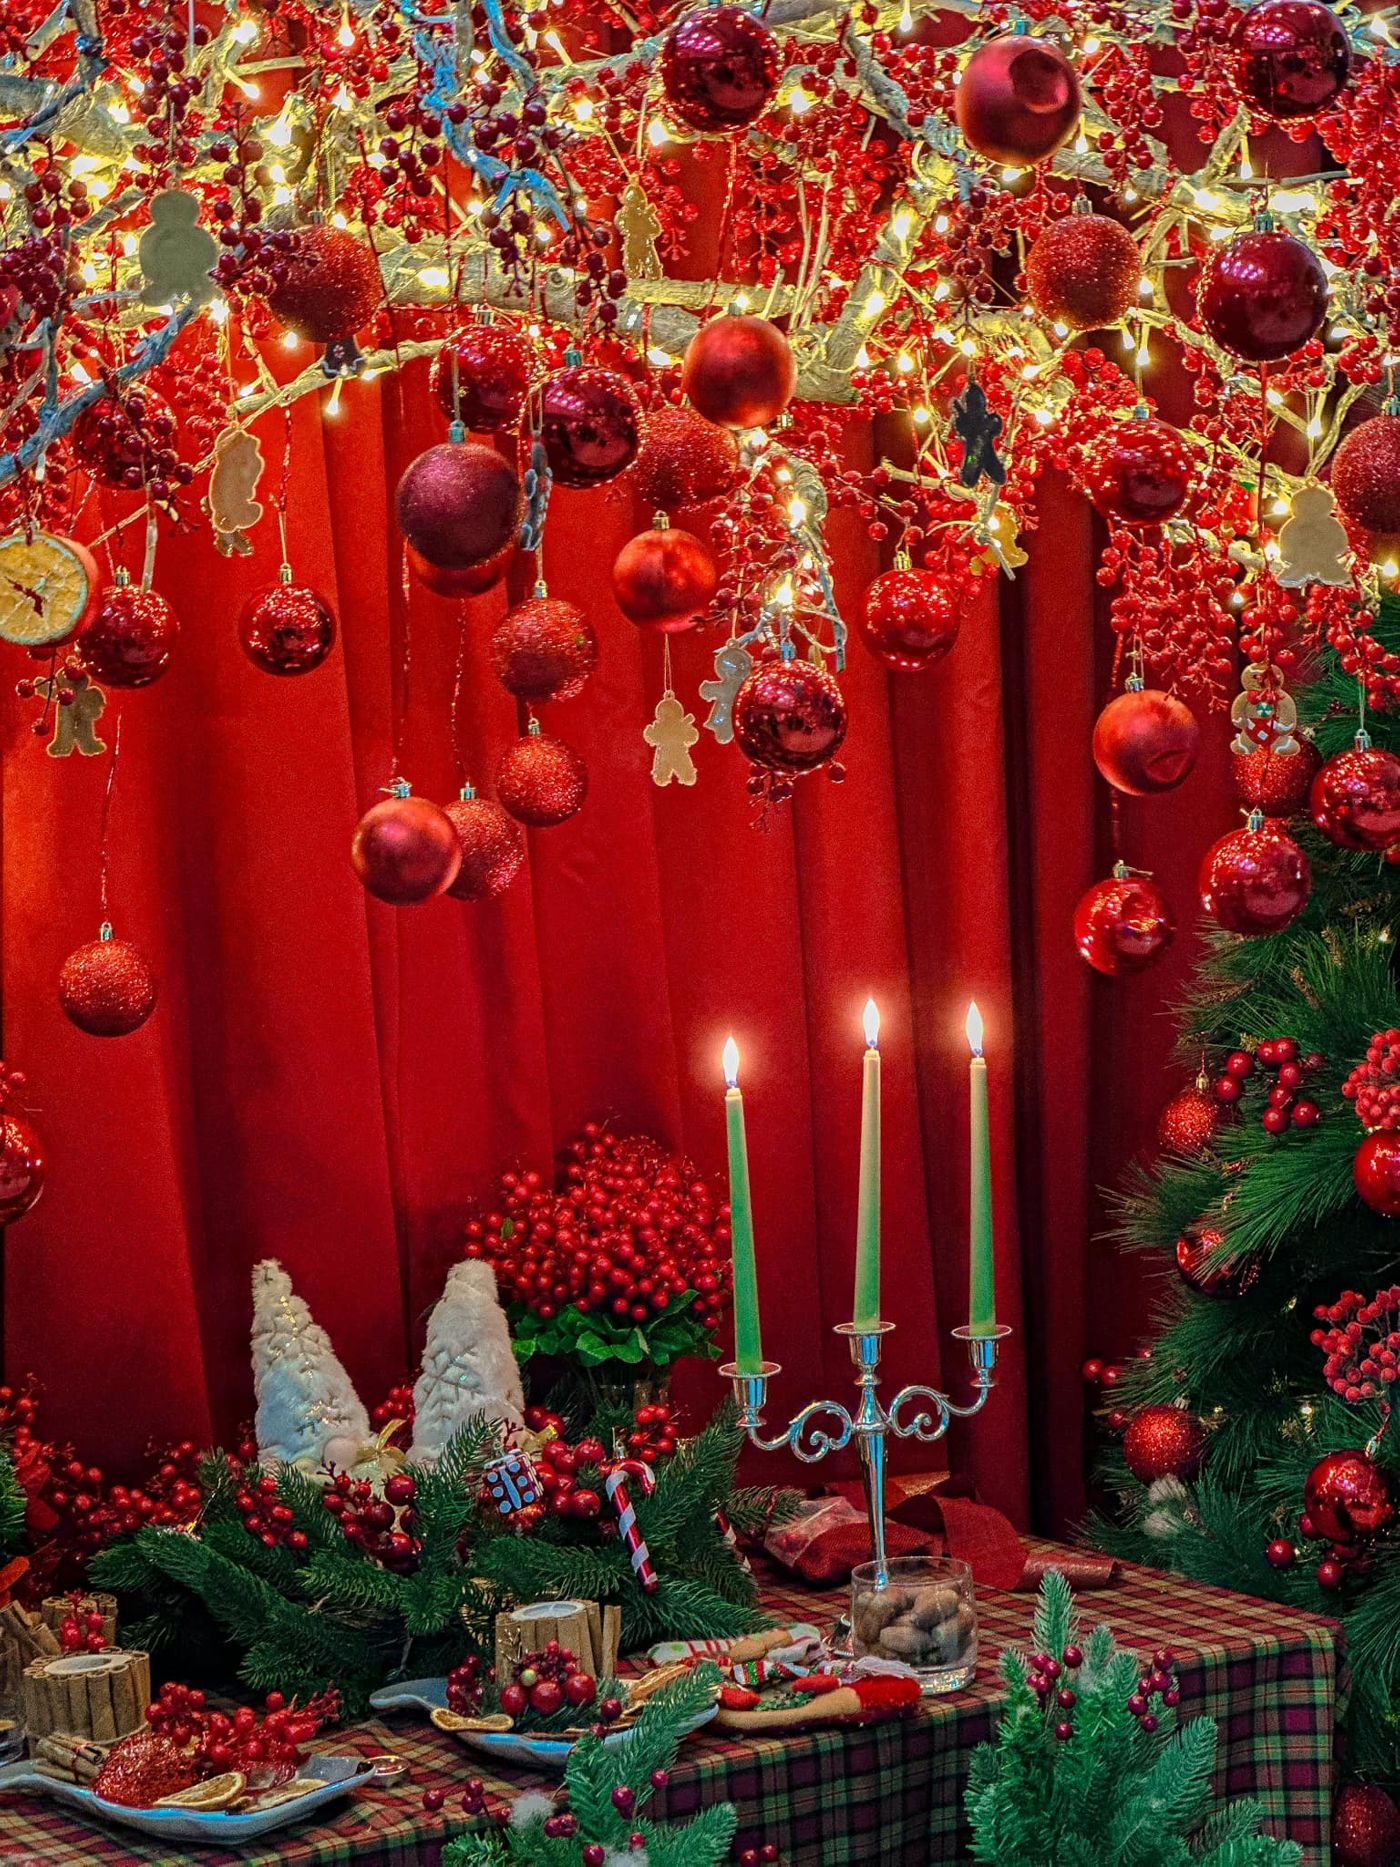 The corners are decorated in a sparkling Christmas style.